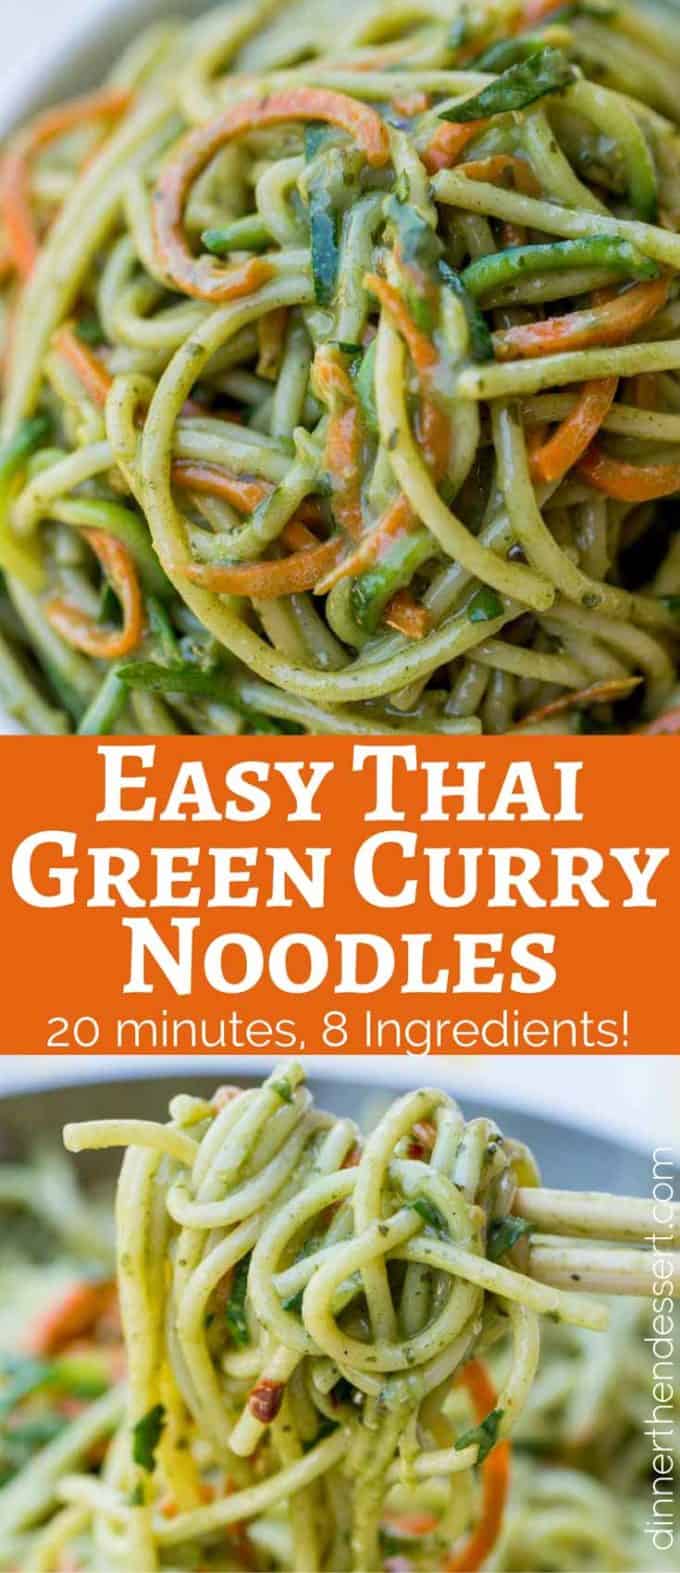 We LOVE this Easy Thai Green Curry Noodles, they take just 20 minutes!